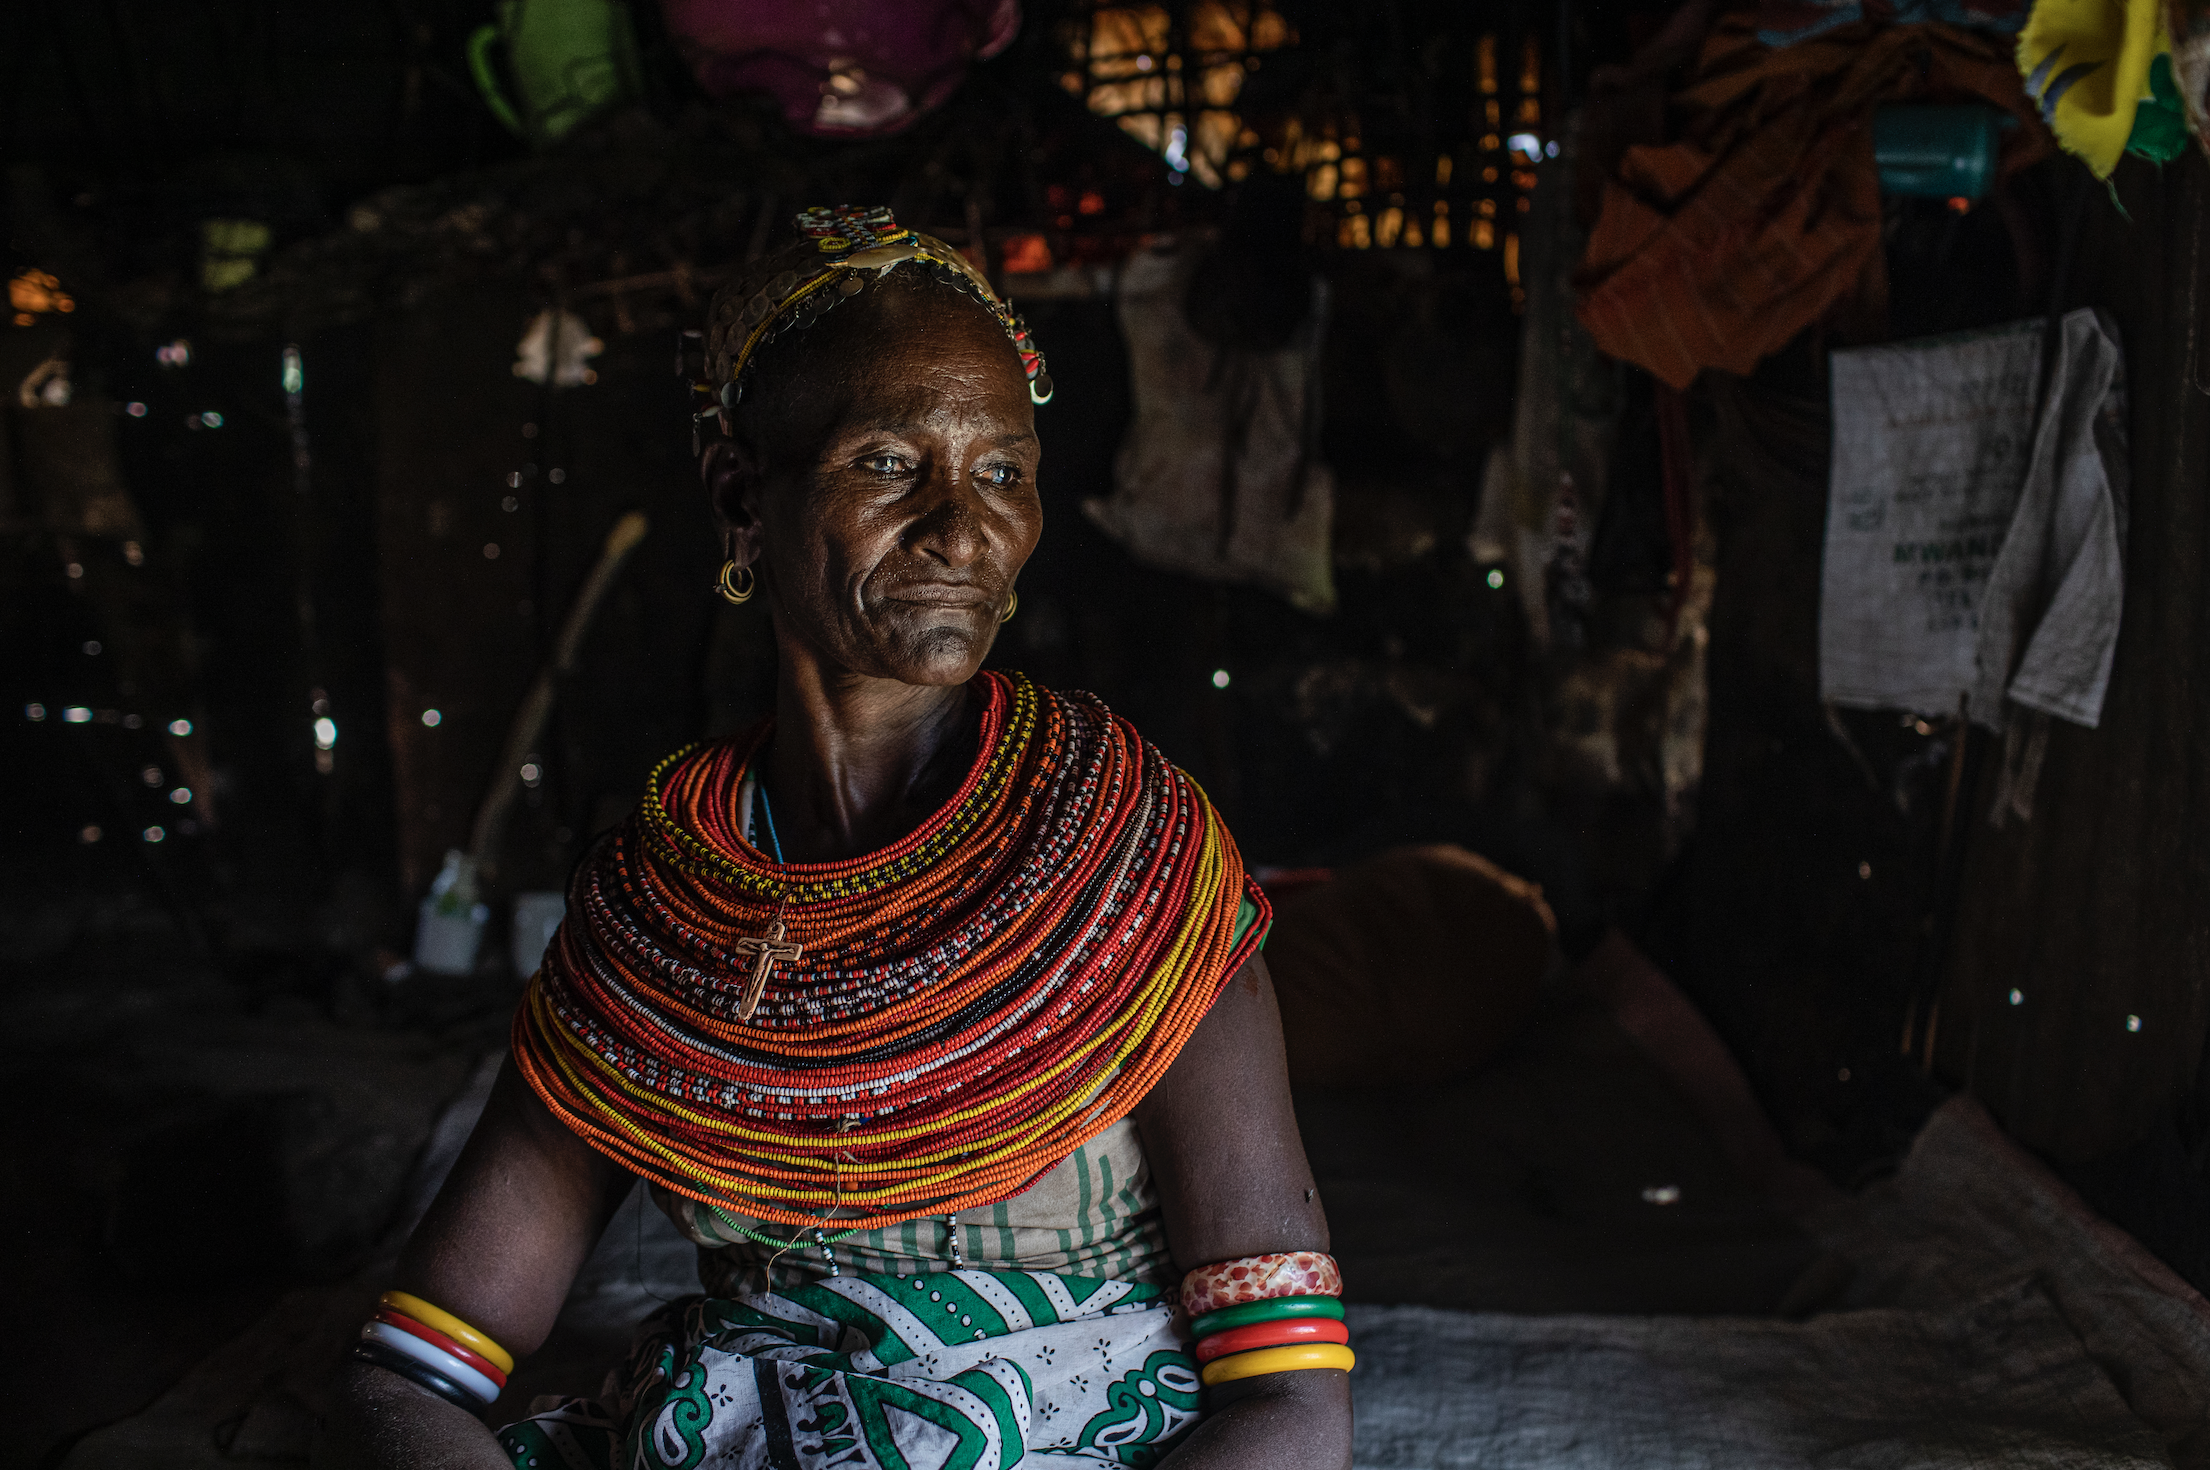 Christine Lemowonapi, a former Rendille circumciser, sits inside her home in Merille, Kenya. She has lost her source of income since the government outlawed the practice. Image by Will Swanson. Kenya, 2020.